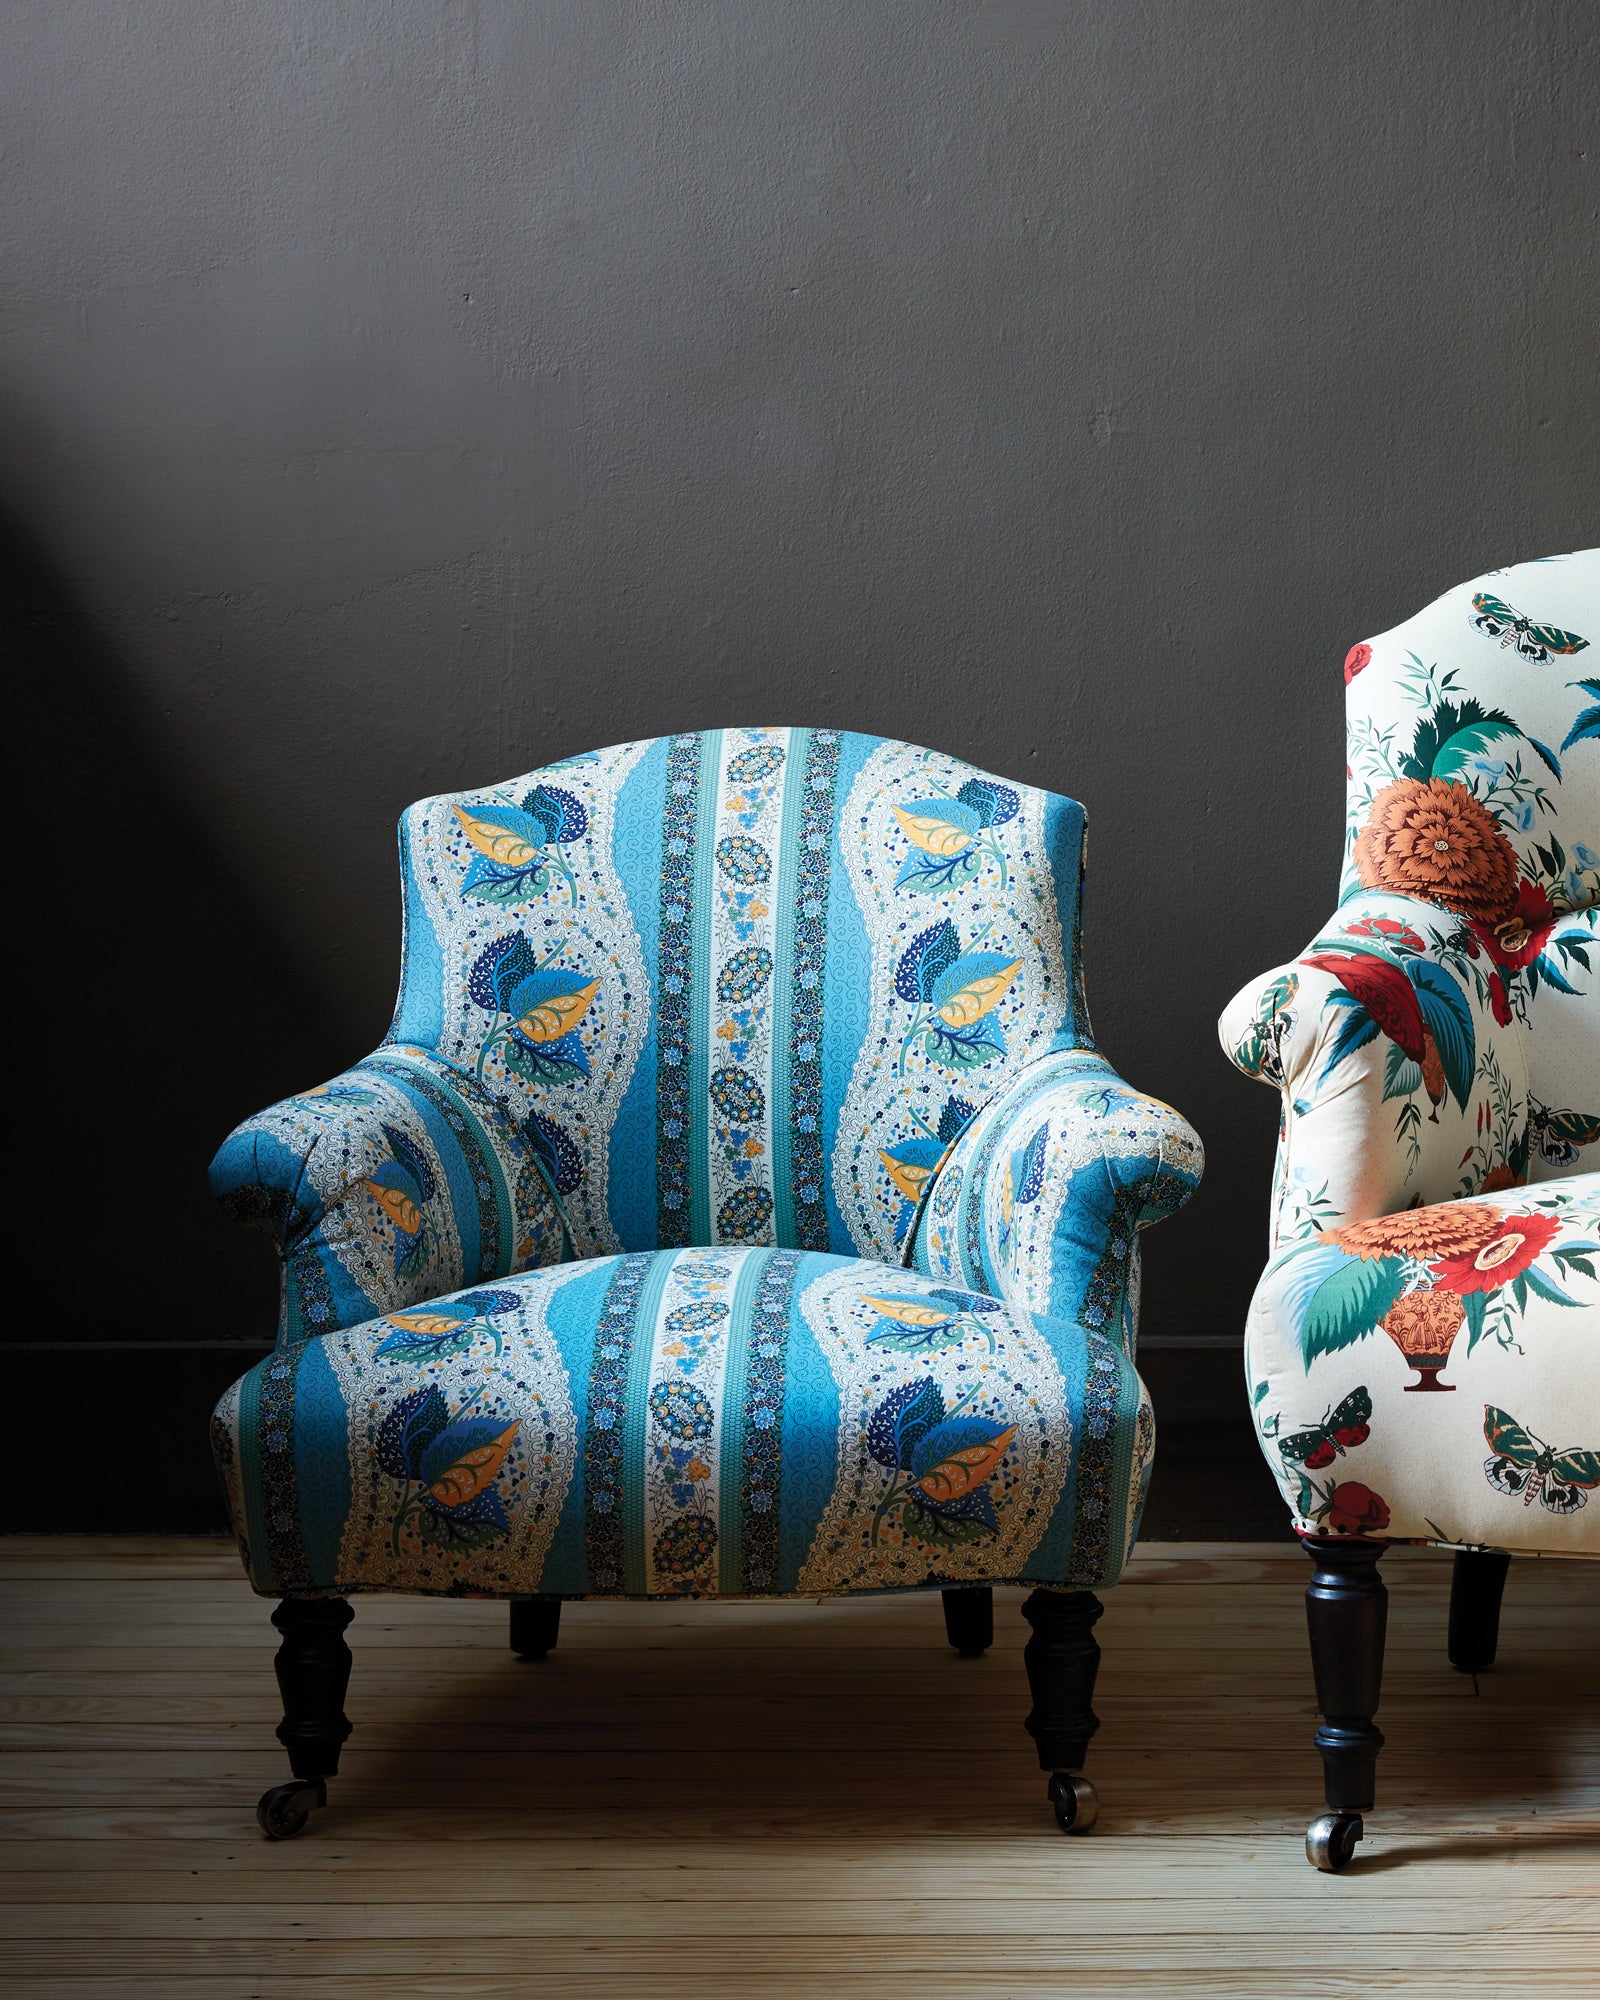  Chair in printed John Derian Fabric with a dark wall background. Photographed in John Derian Fabric. 